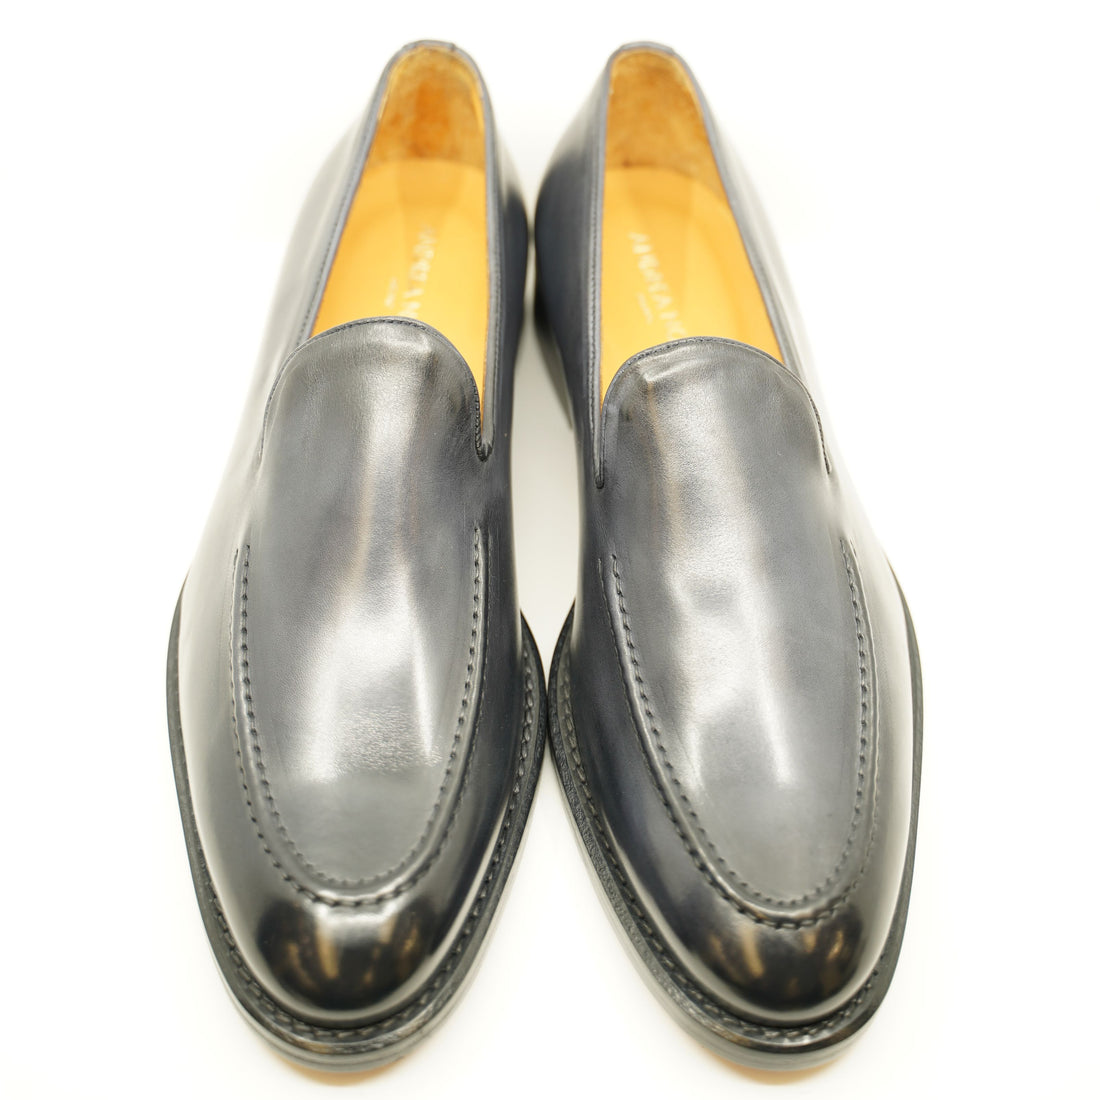 Andrea Nobile - Grey leather dress loafer with burgundy sole